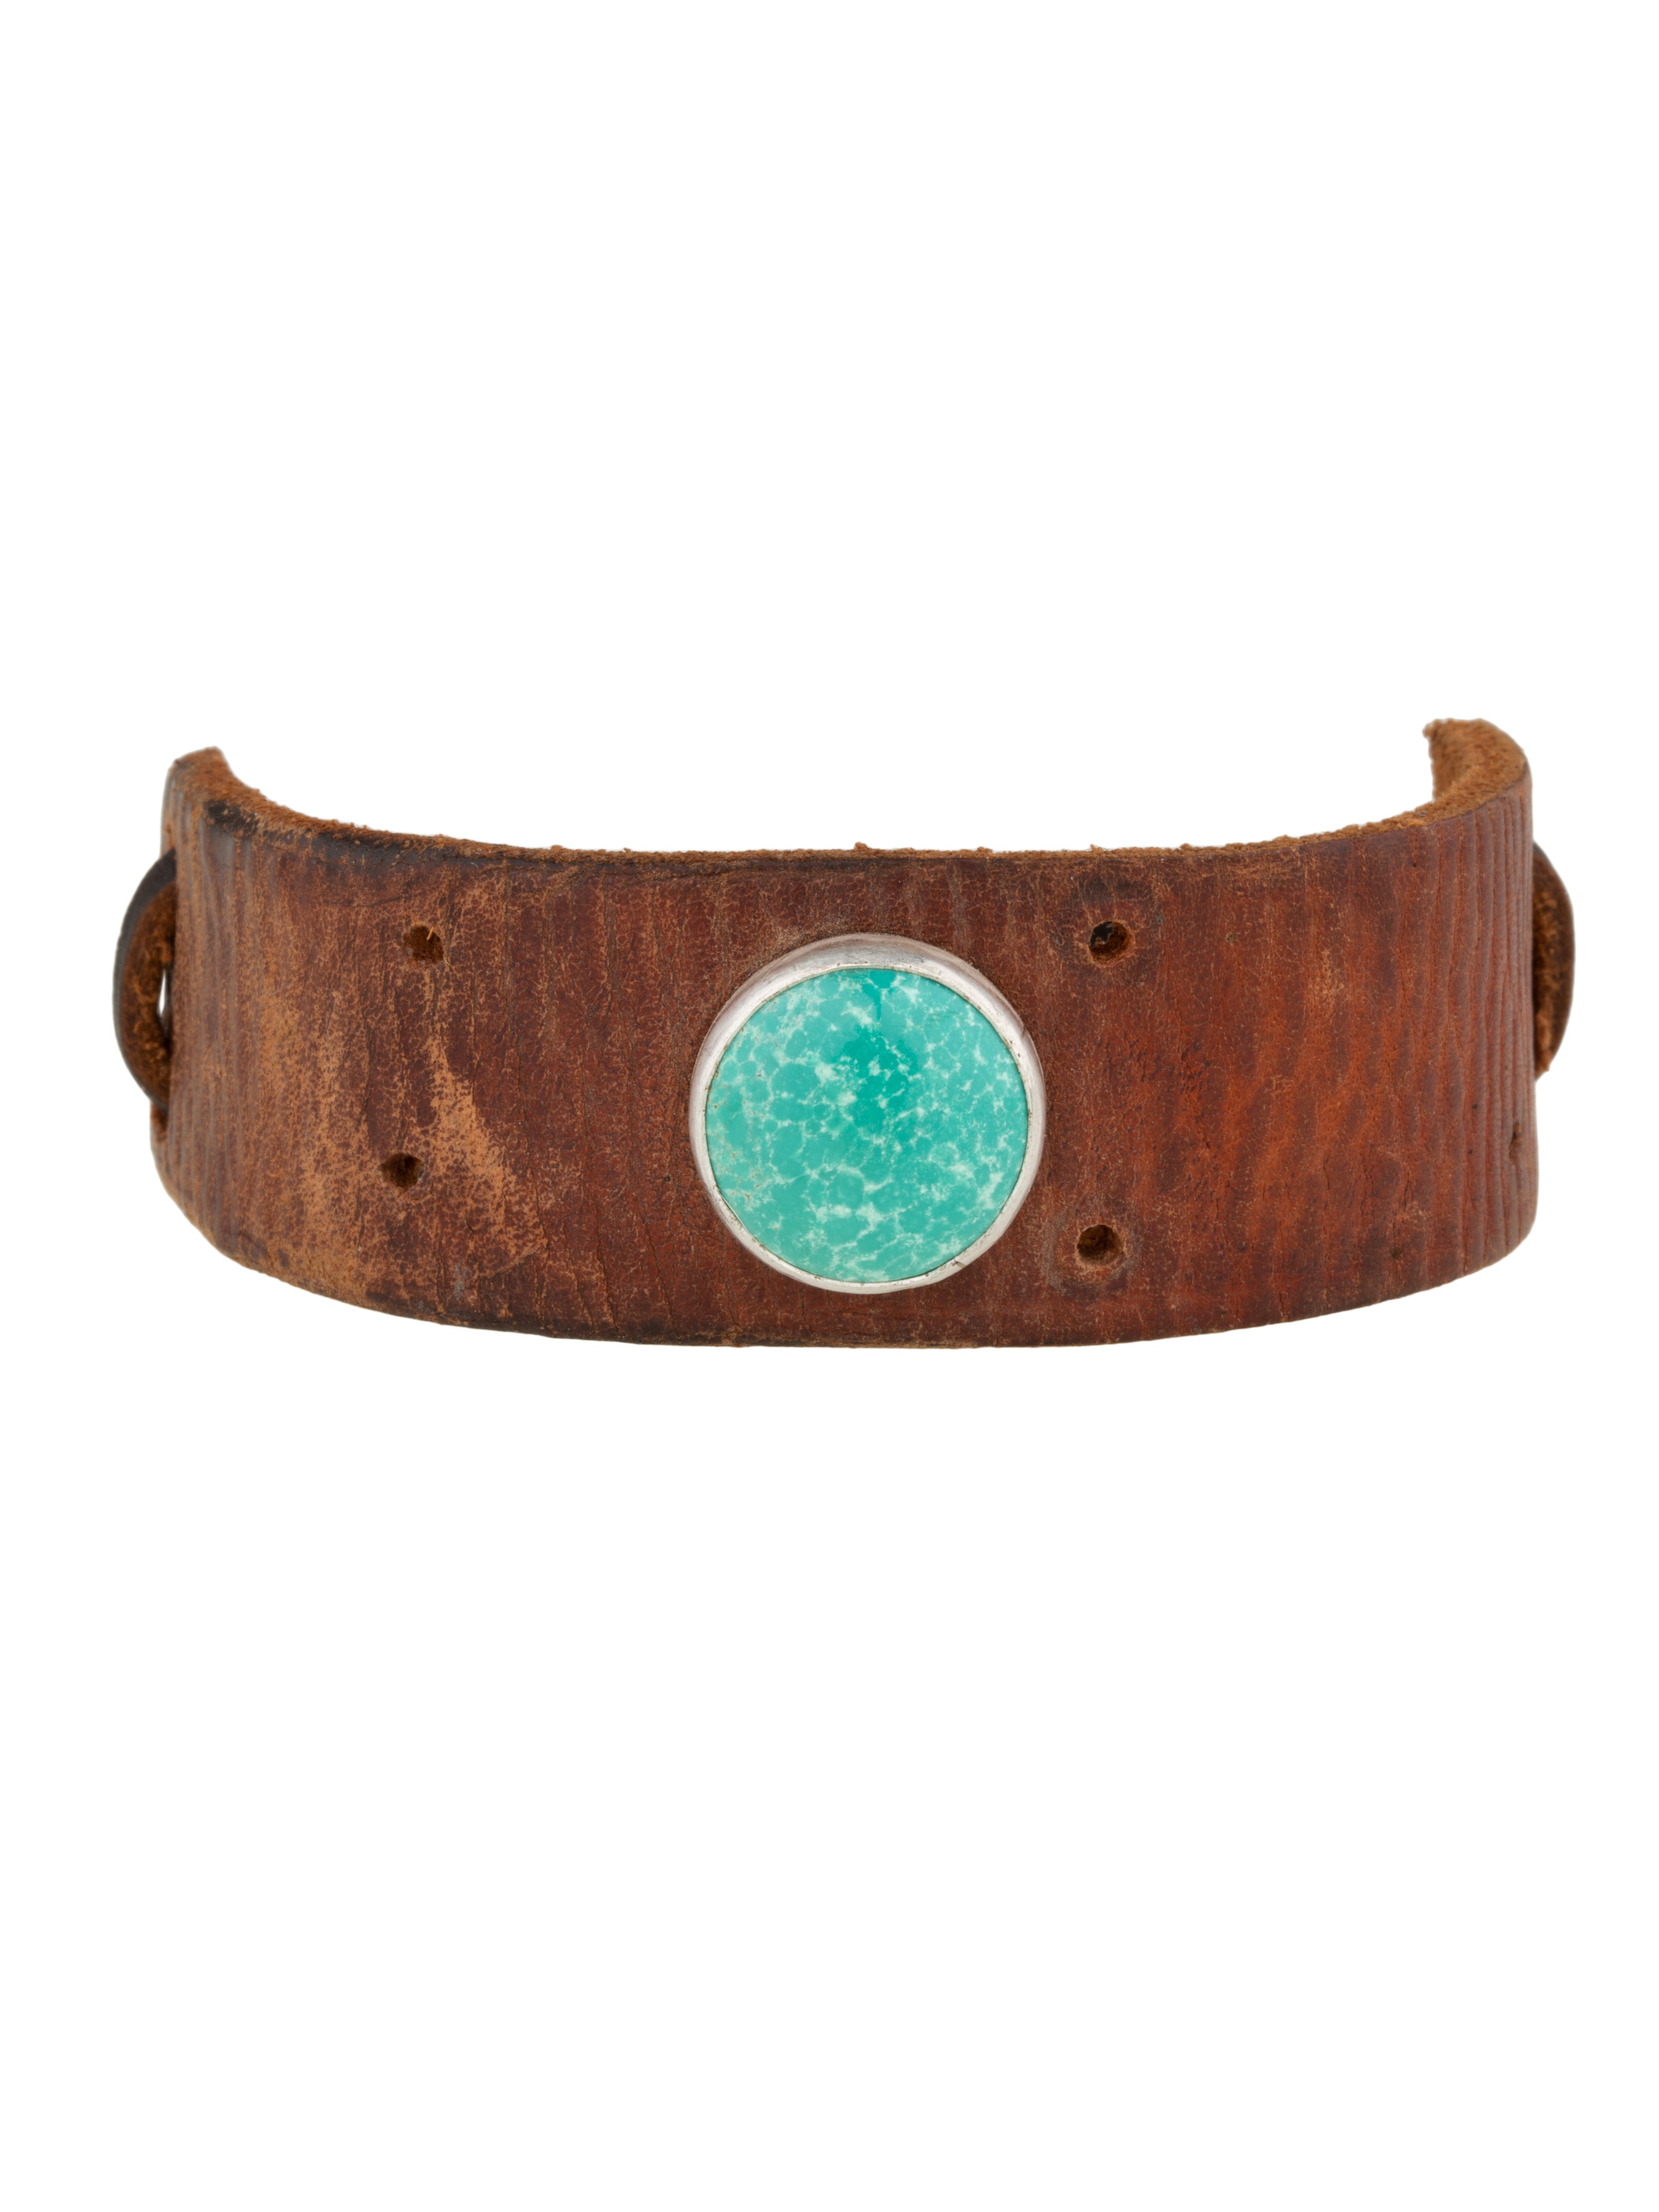 Turquoise Pond Leather Cuff